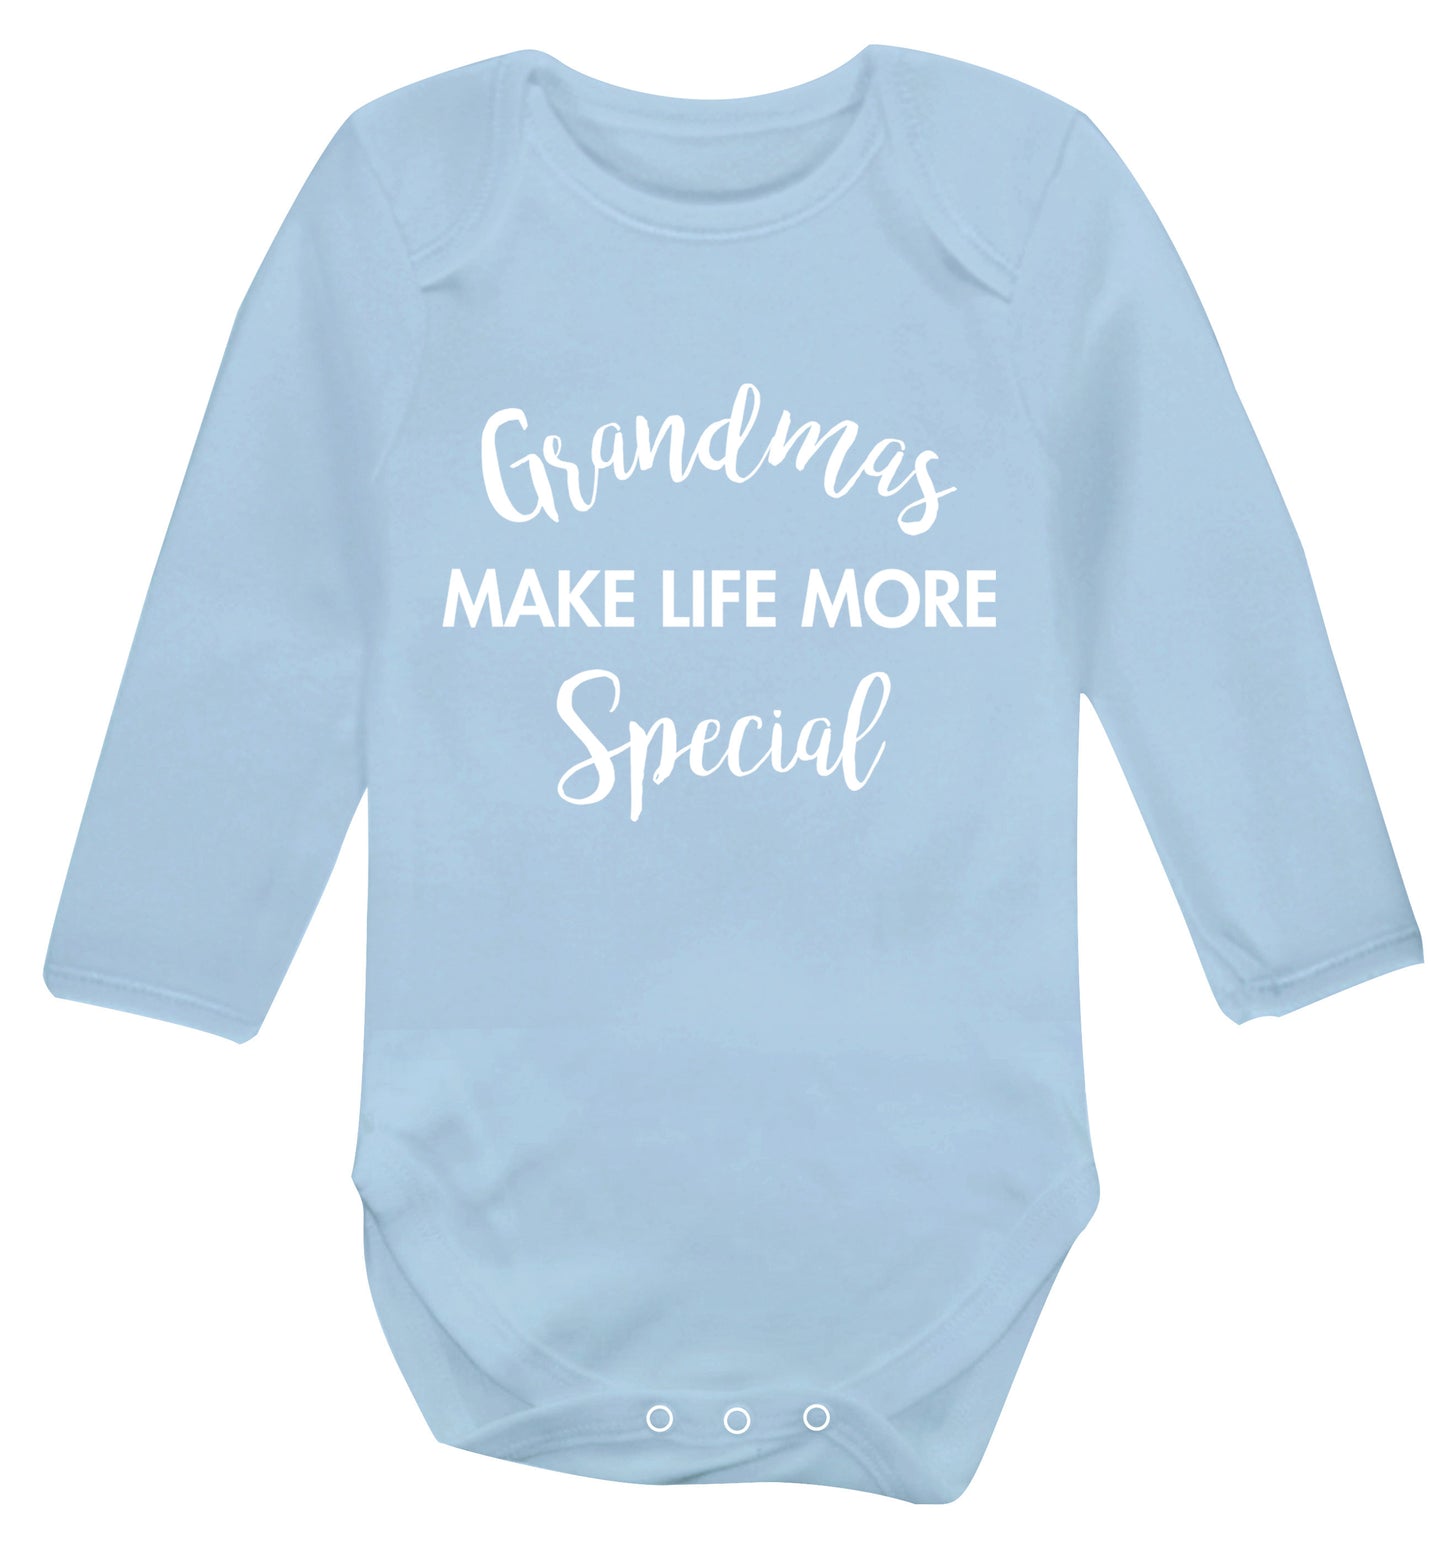 Grandmas make life more special Baby Vest long sleeved pale blue 6-12 months